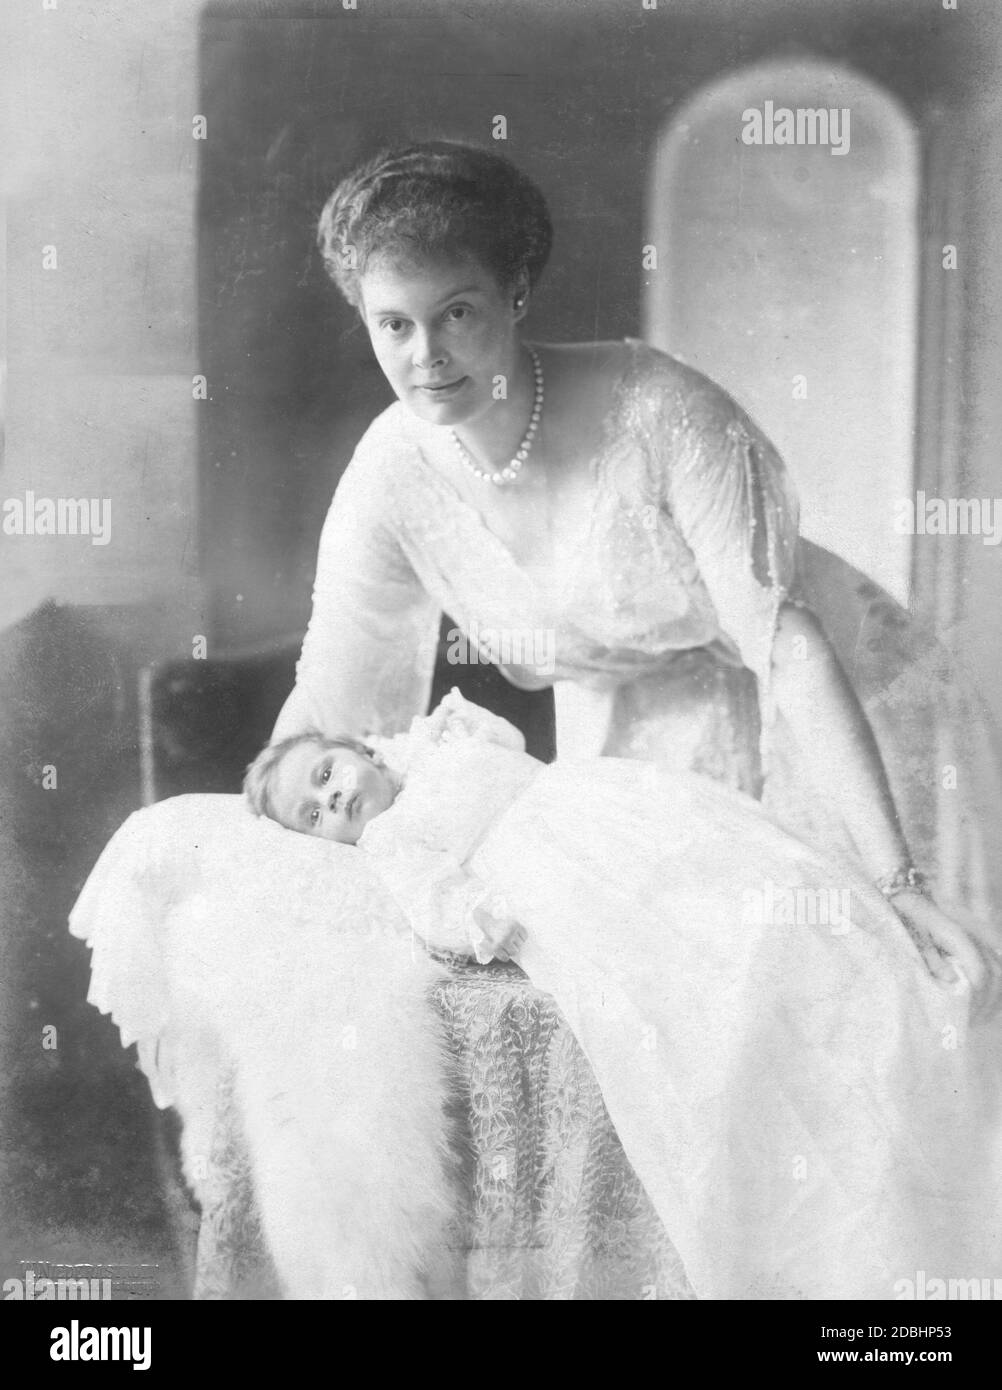 Crown Princess Cecilie of Mecklenburg with her youngest daughter Cecilie of Prussia in 1917. The photo was taken by the court photographers Selle & Kuntze (owner W. Niederastroth) from Potsdam. Stock Photo